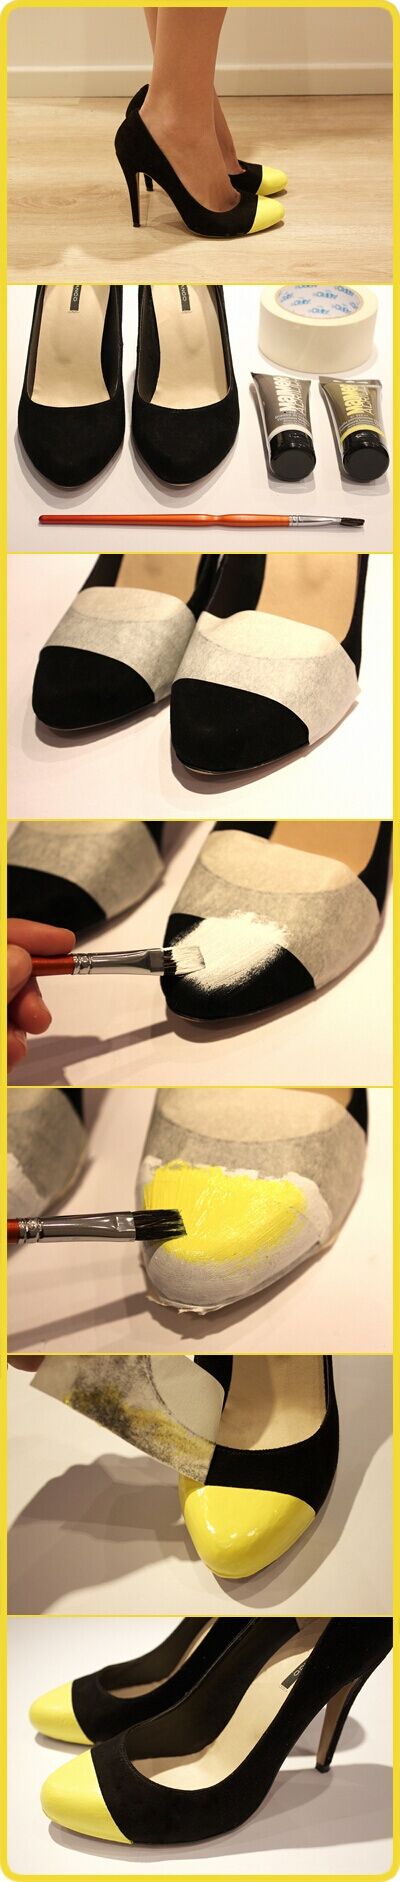 Great idea to restyle old shoes & add a little color!!